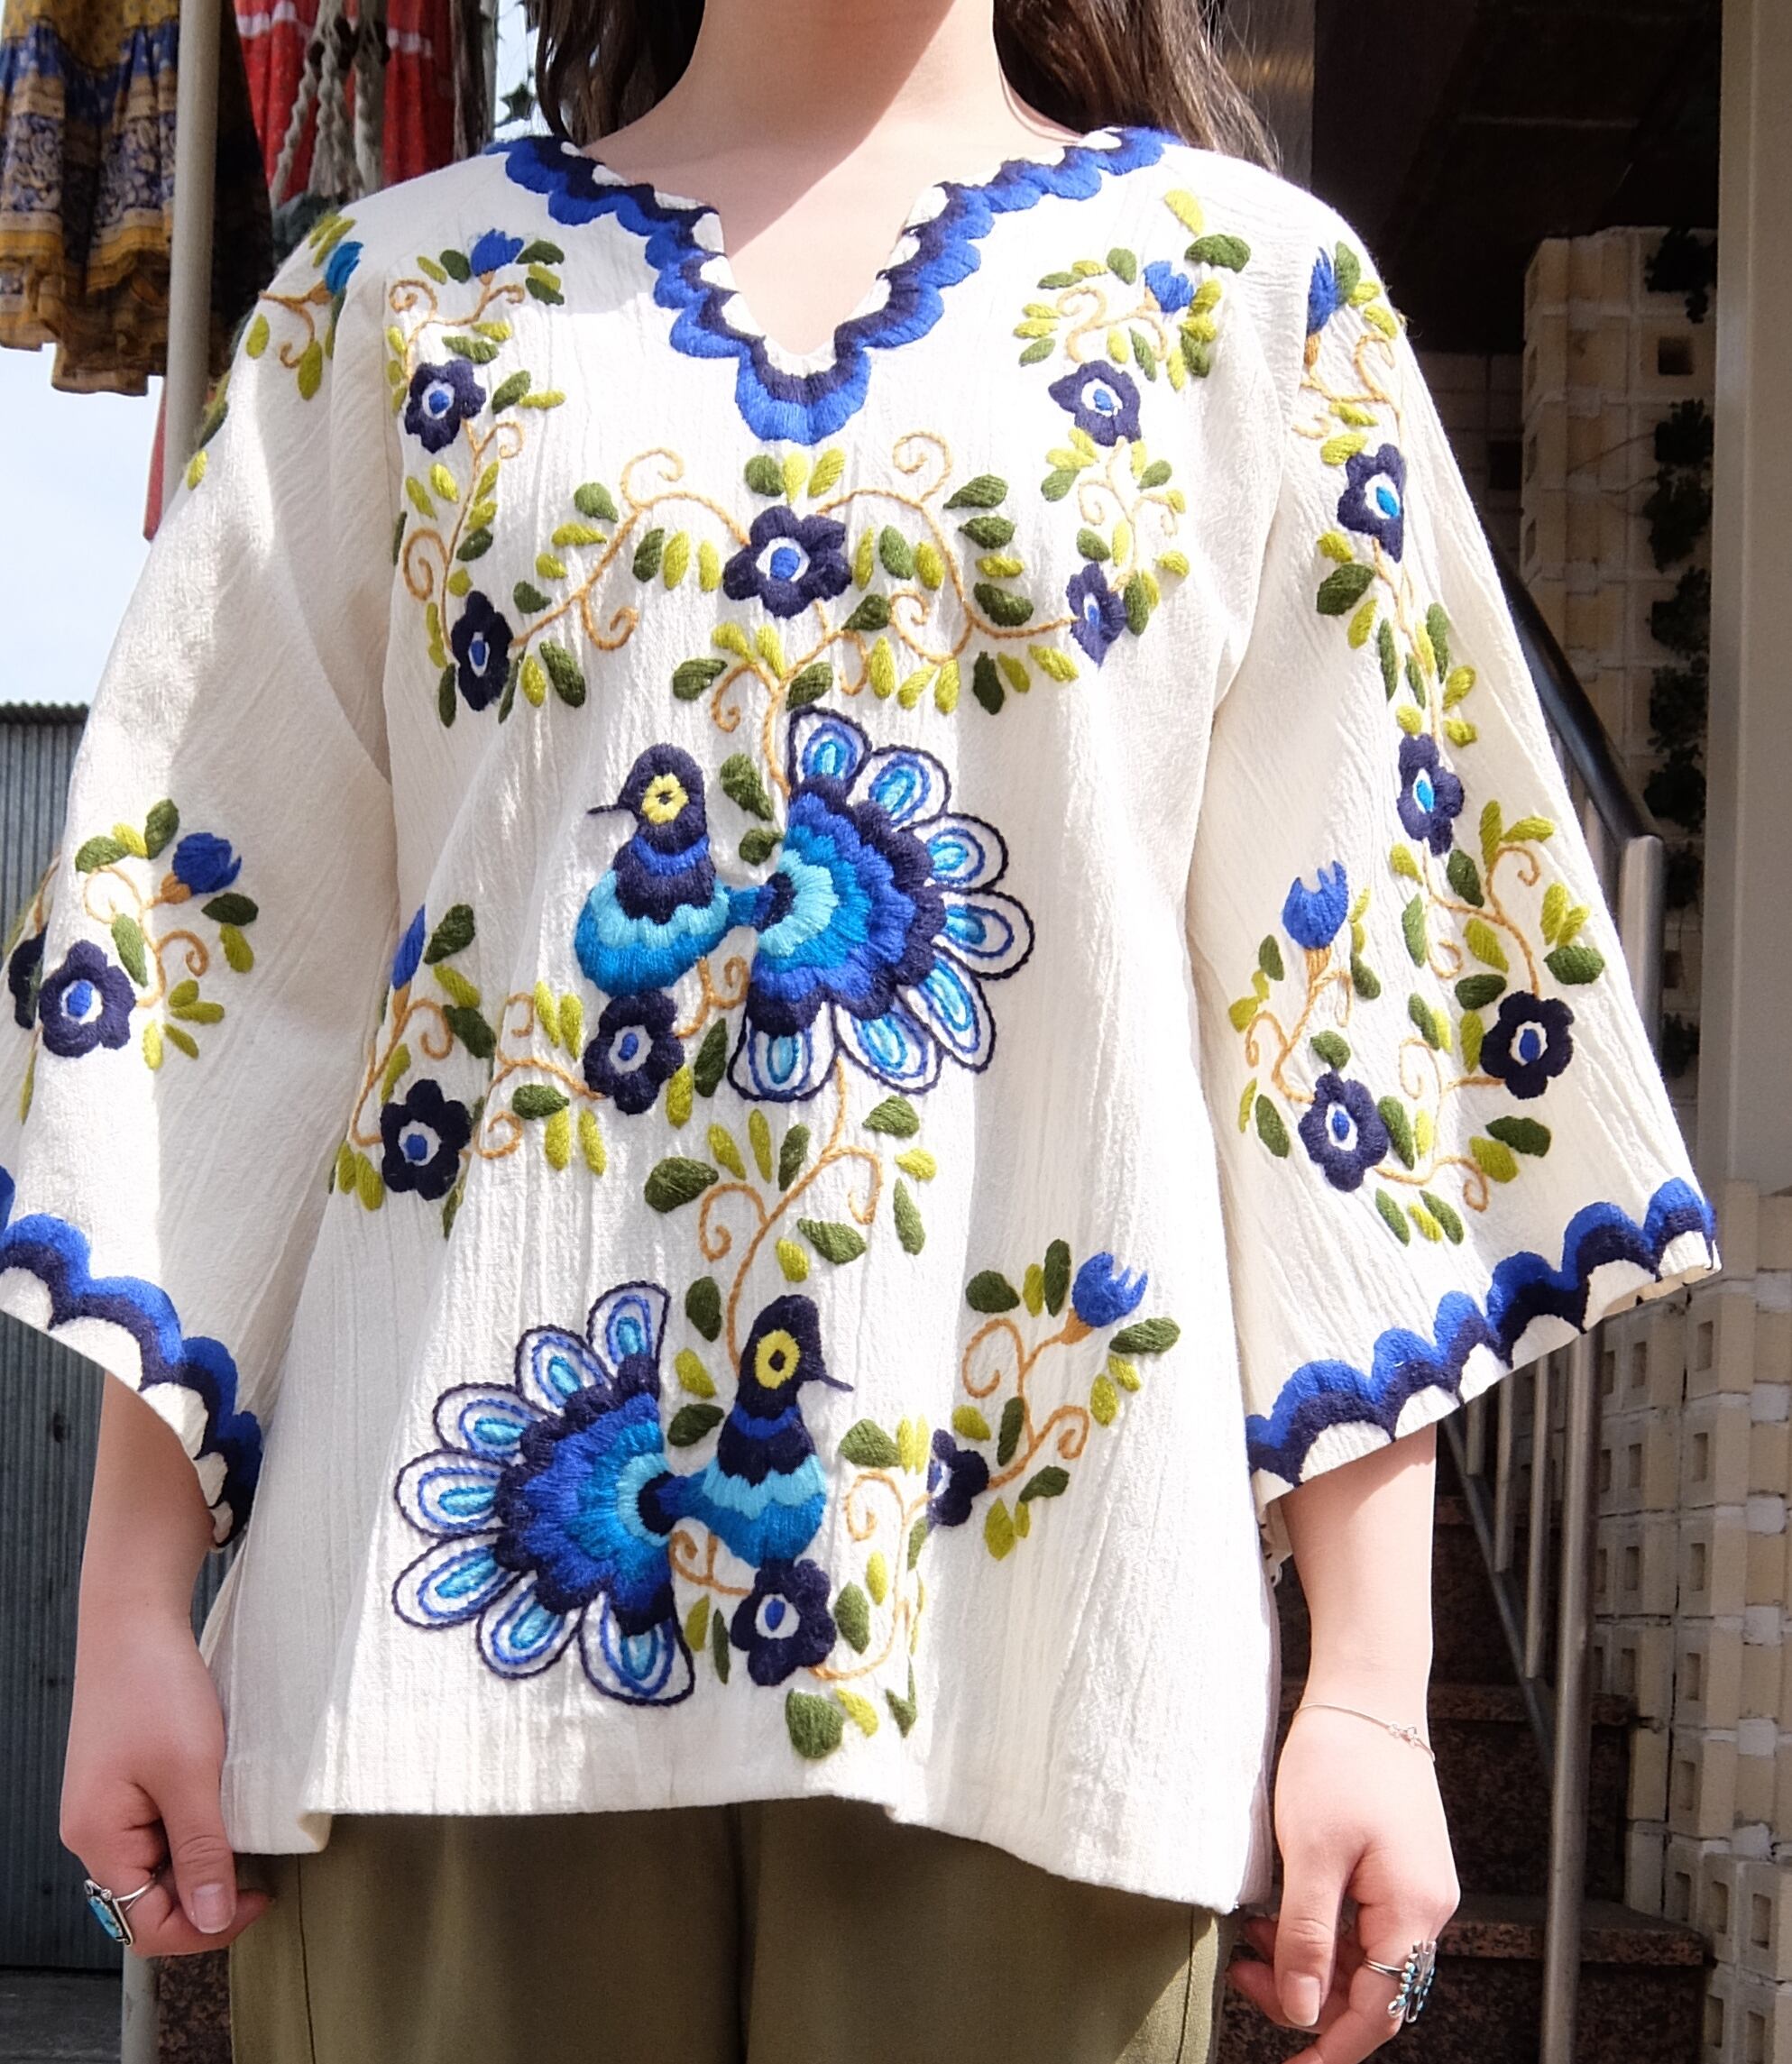 Embroidery vintage tunic／ヴィンテージ 刺繍 チュニック | BIG TIME ｜ヴィンテージ 古着  BIGTIME（ビッグタイム） powered by BASE